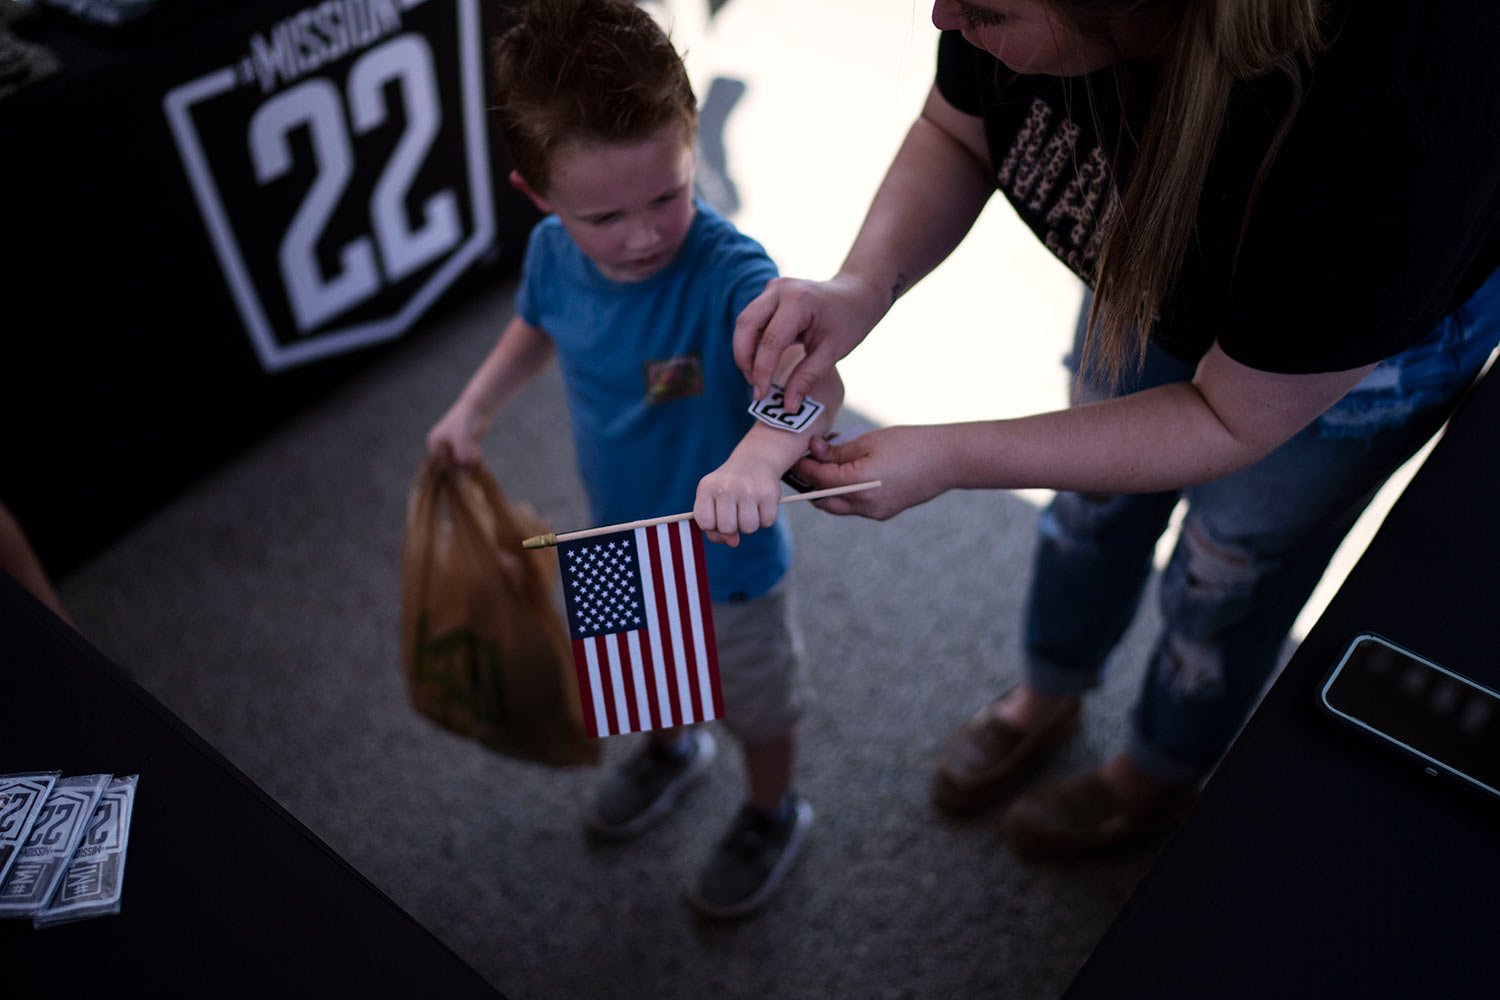  A child gets a Mission-22 sticker, a nonprofit that aims to end military and veteran suicide, Saturday, June 10, 2023, at a festival in Jacksonville, Texas. (AP Photo/David Goldman)  